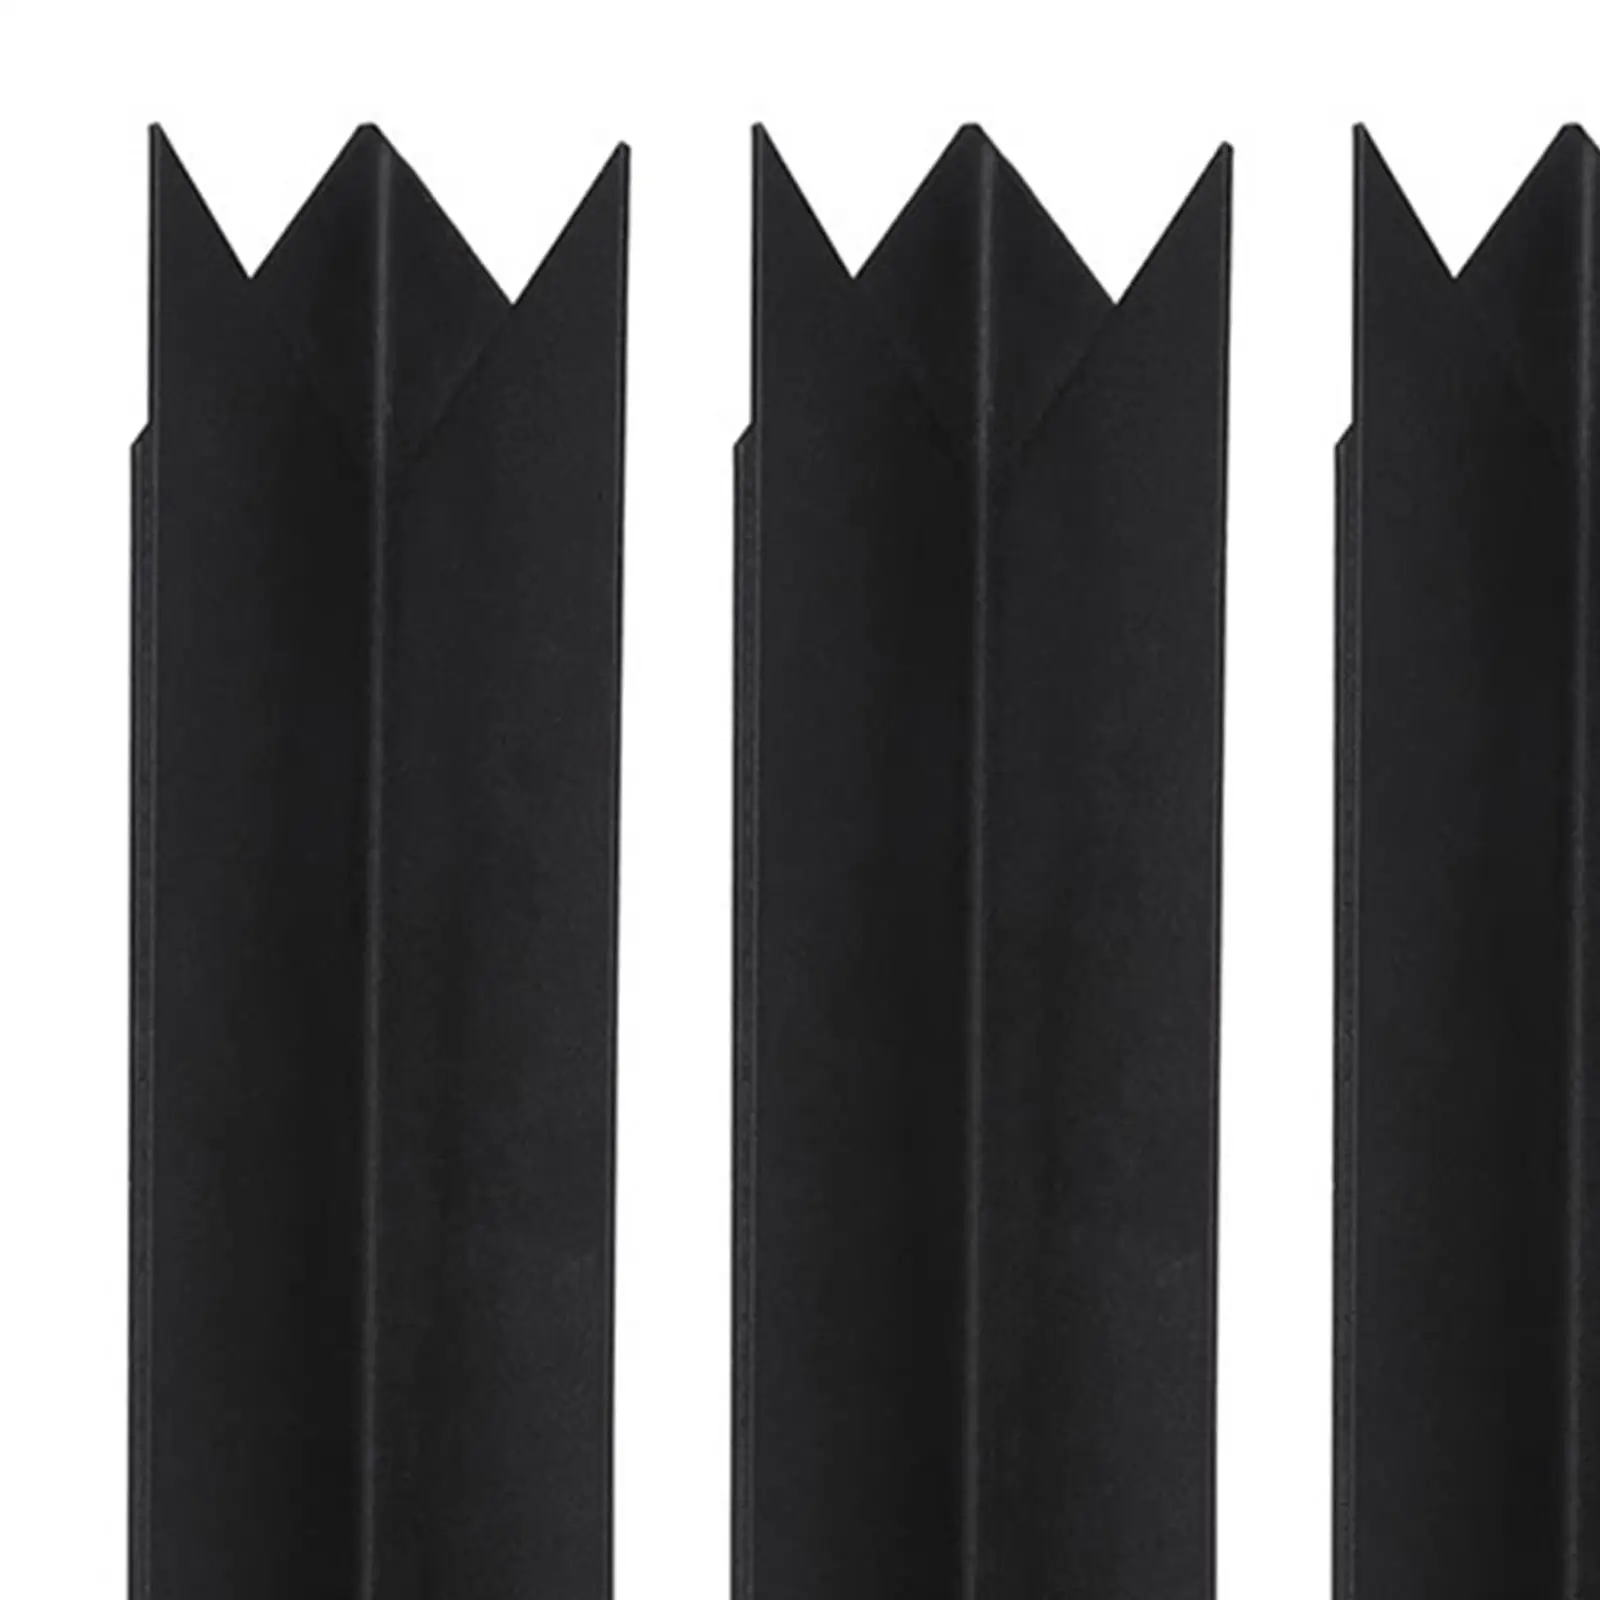 4x Connector Clips Heavy Duty Black Metal Stakes for Yard Courtyard Outdoor